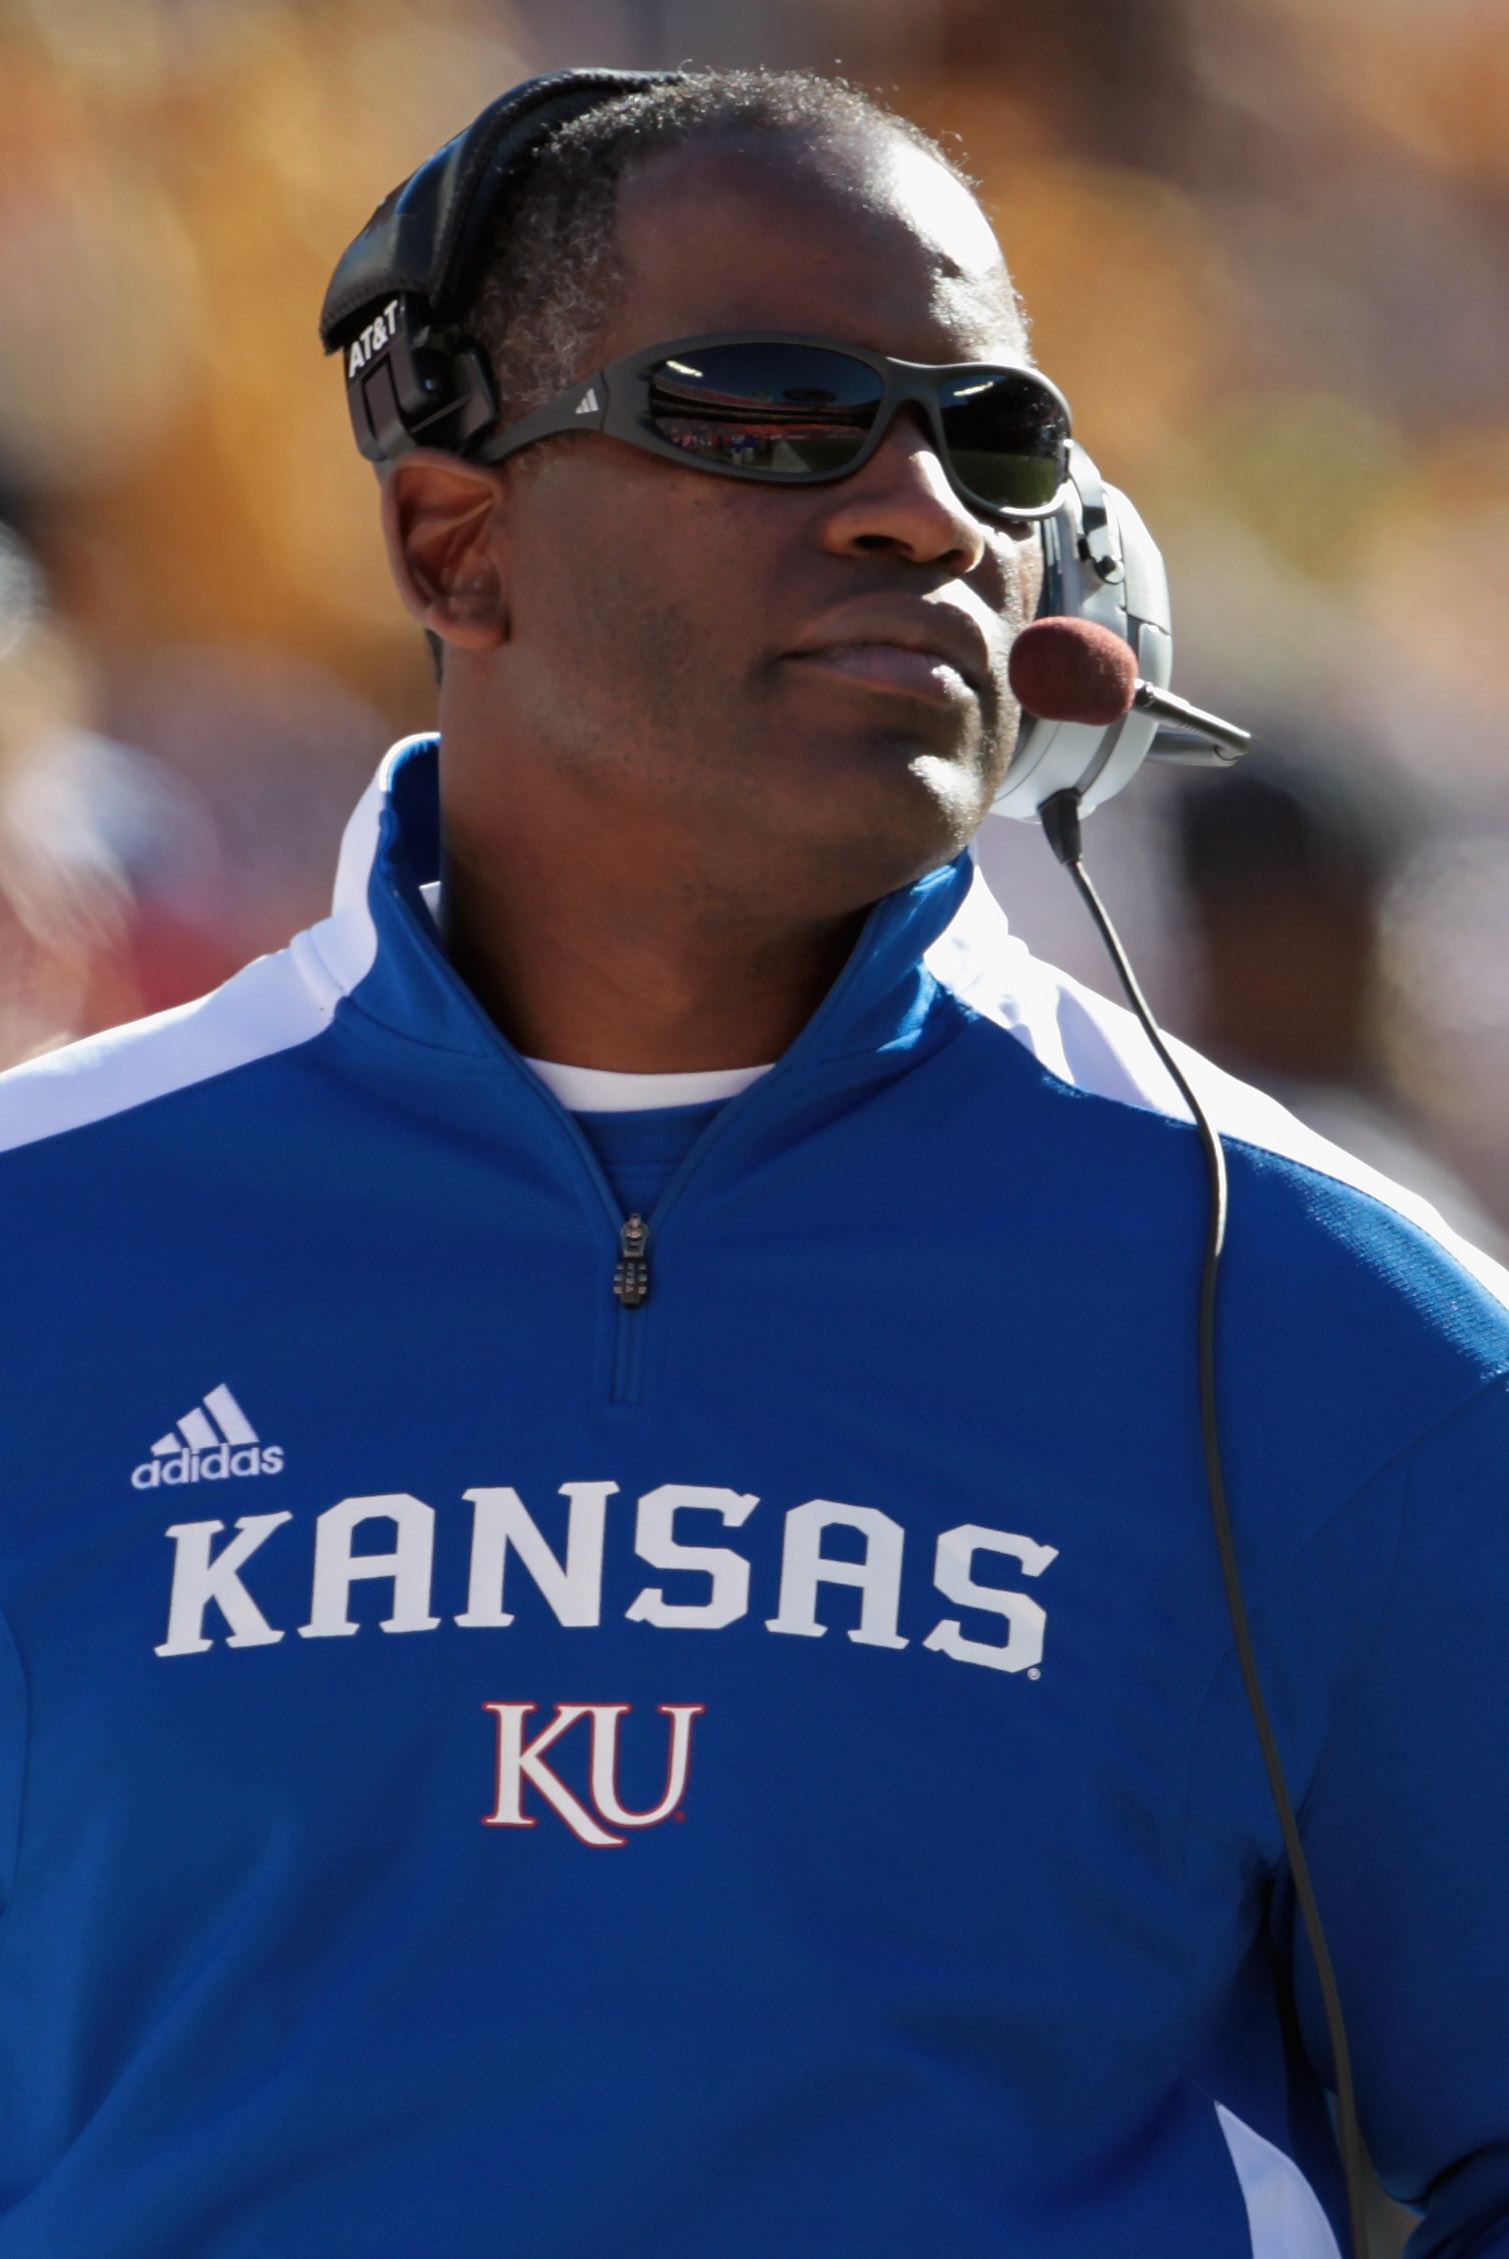 KANSAS CITY, MO - NOVEMBER 27:  Head coach Turner Gill of the Kansas Jayhawks coaches from the sidelines during the game against the Missouri Tigers on November 27, 2010 at Arrowhead Stadium in Kansas City, Missouri.  (Photo by Jamie Squire/Getty Images)